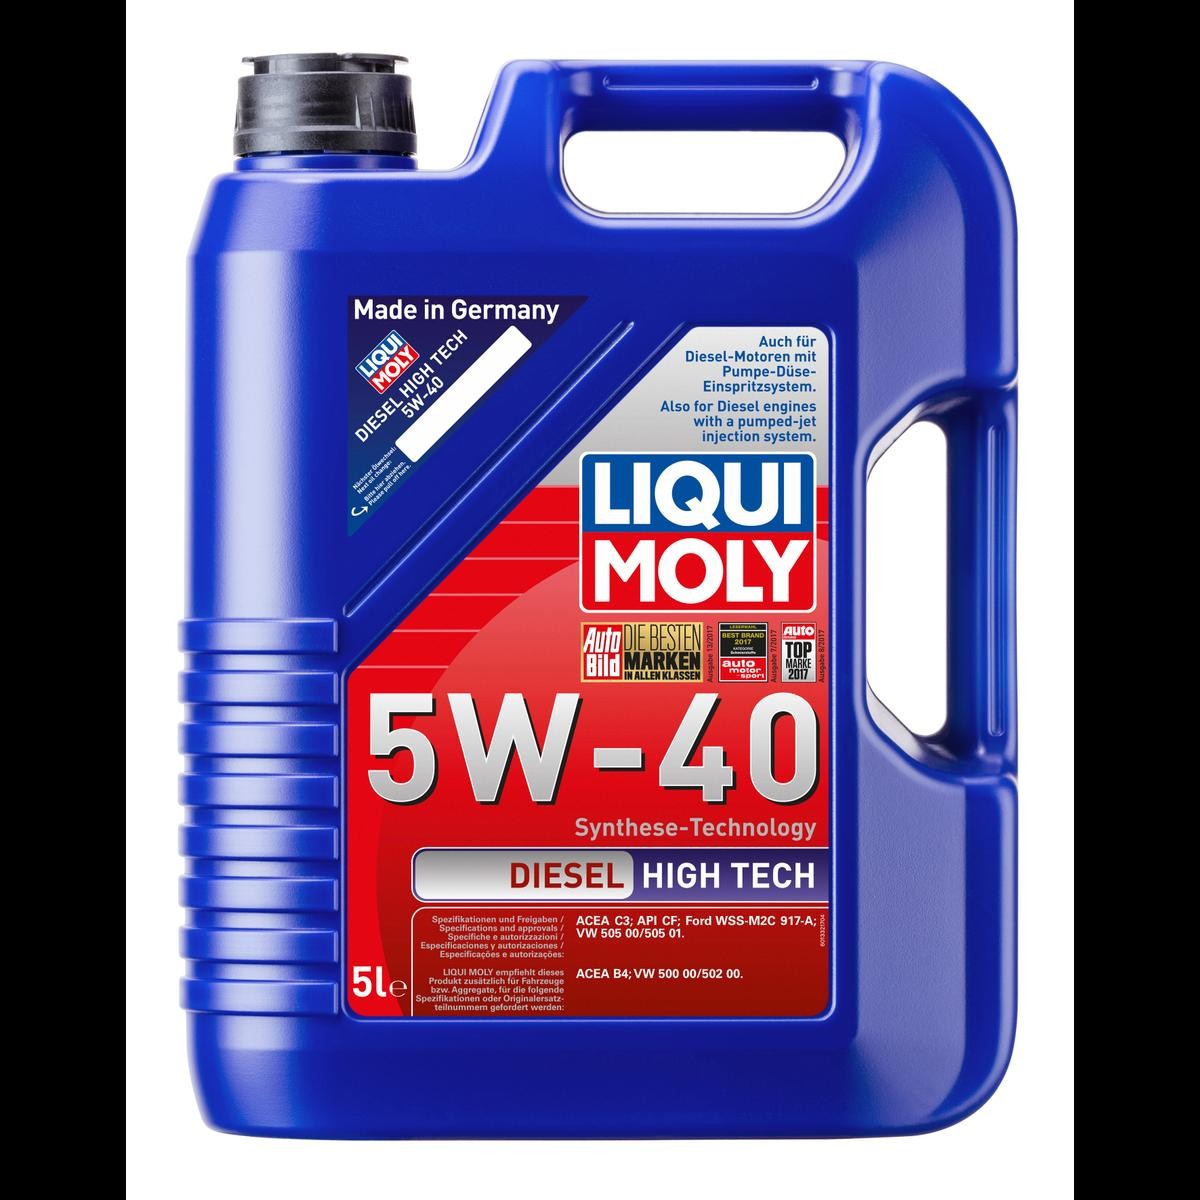 LIQUI MOLY Diesel, High Tech 1332 Engine oil 5W-40, 5l, Part Synthetic Oil